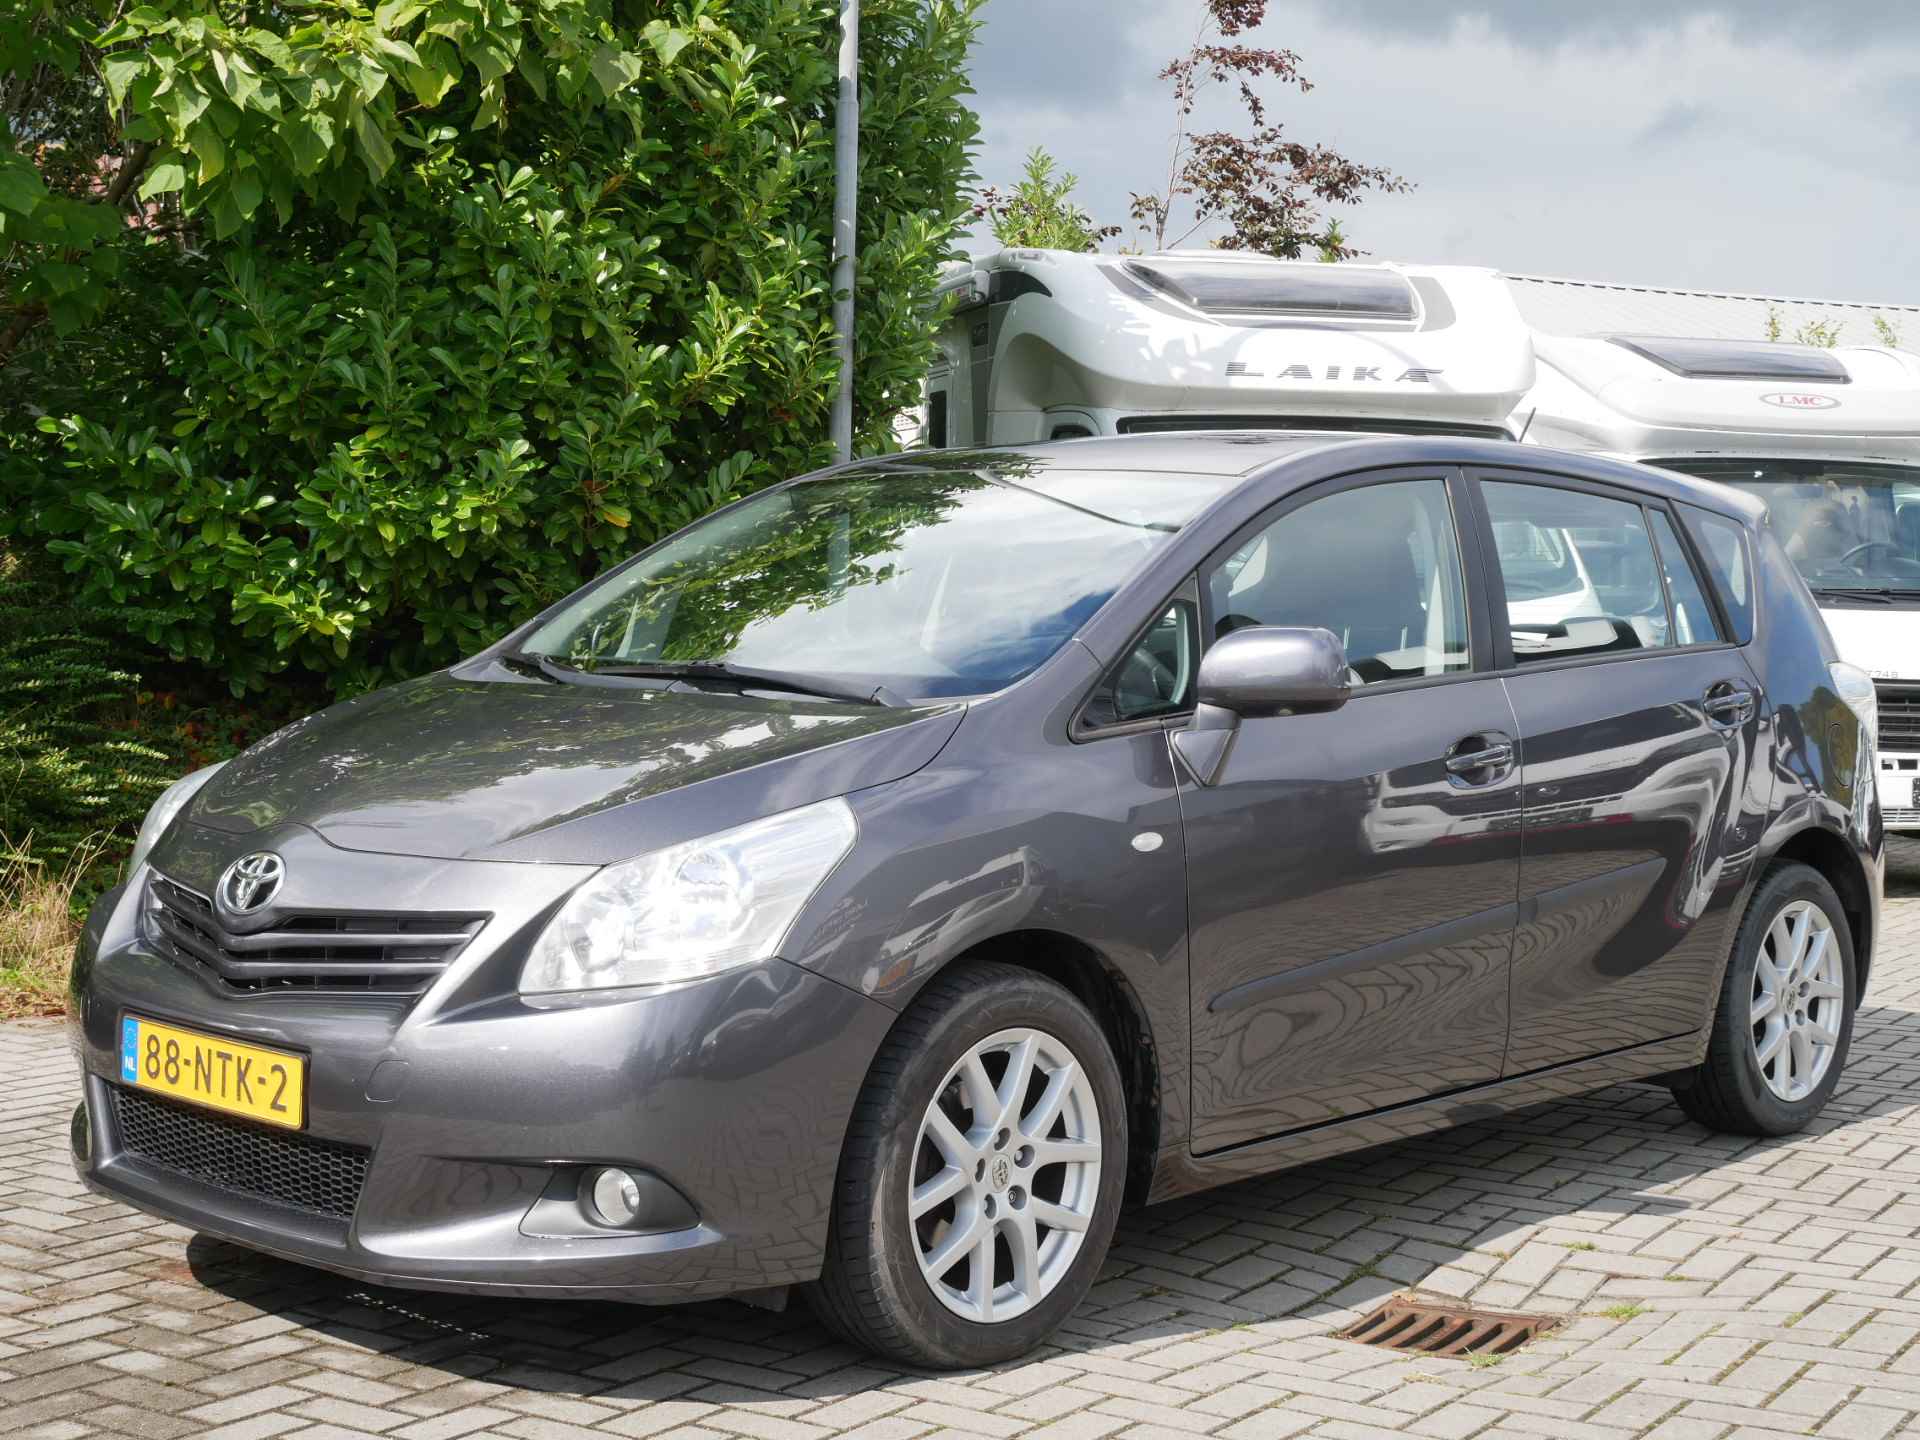 Toyota Verso 1.8 VVT-i Business Limited, Automaat, Zeer goede staat!!! - 4/26